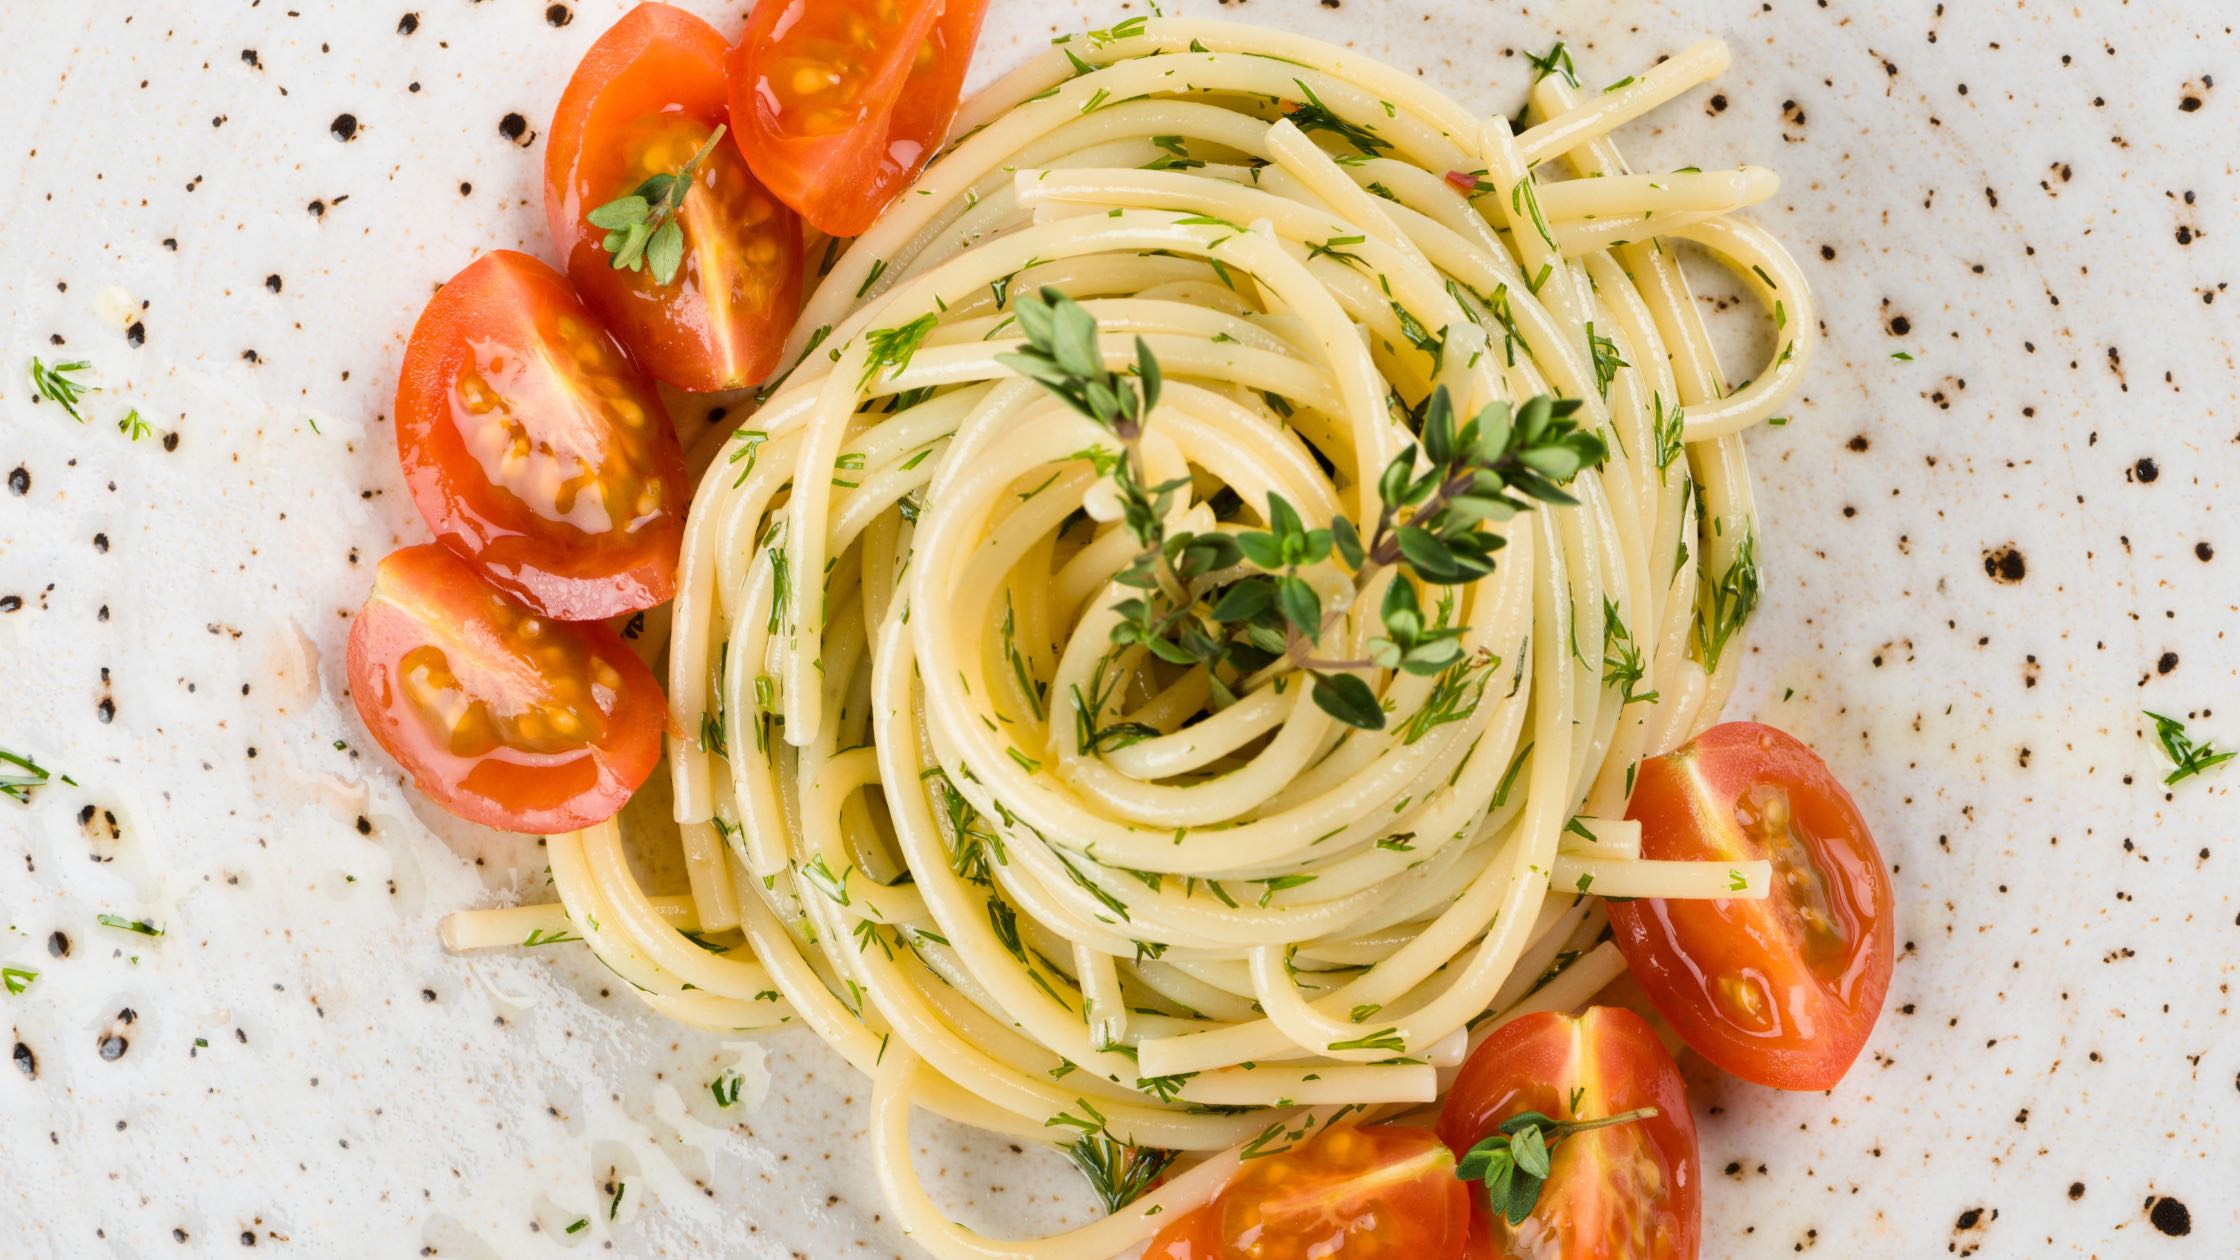 image of spaghetti with sliced cherry tomatoes and herbs